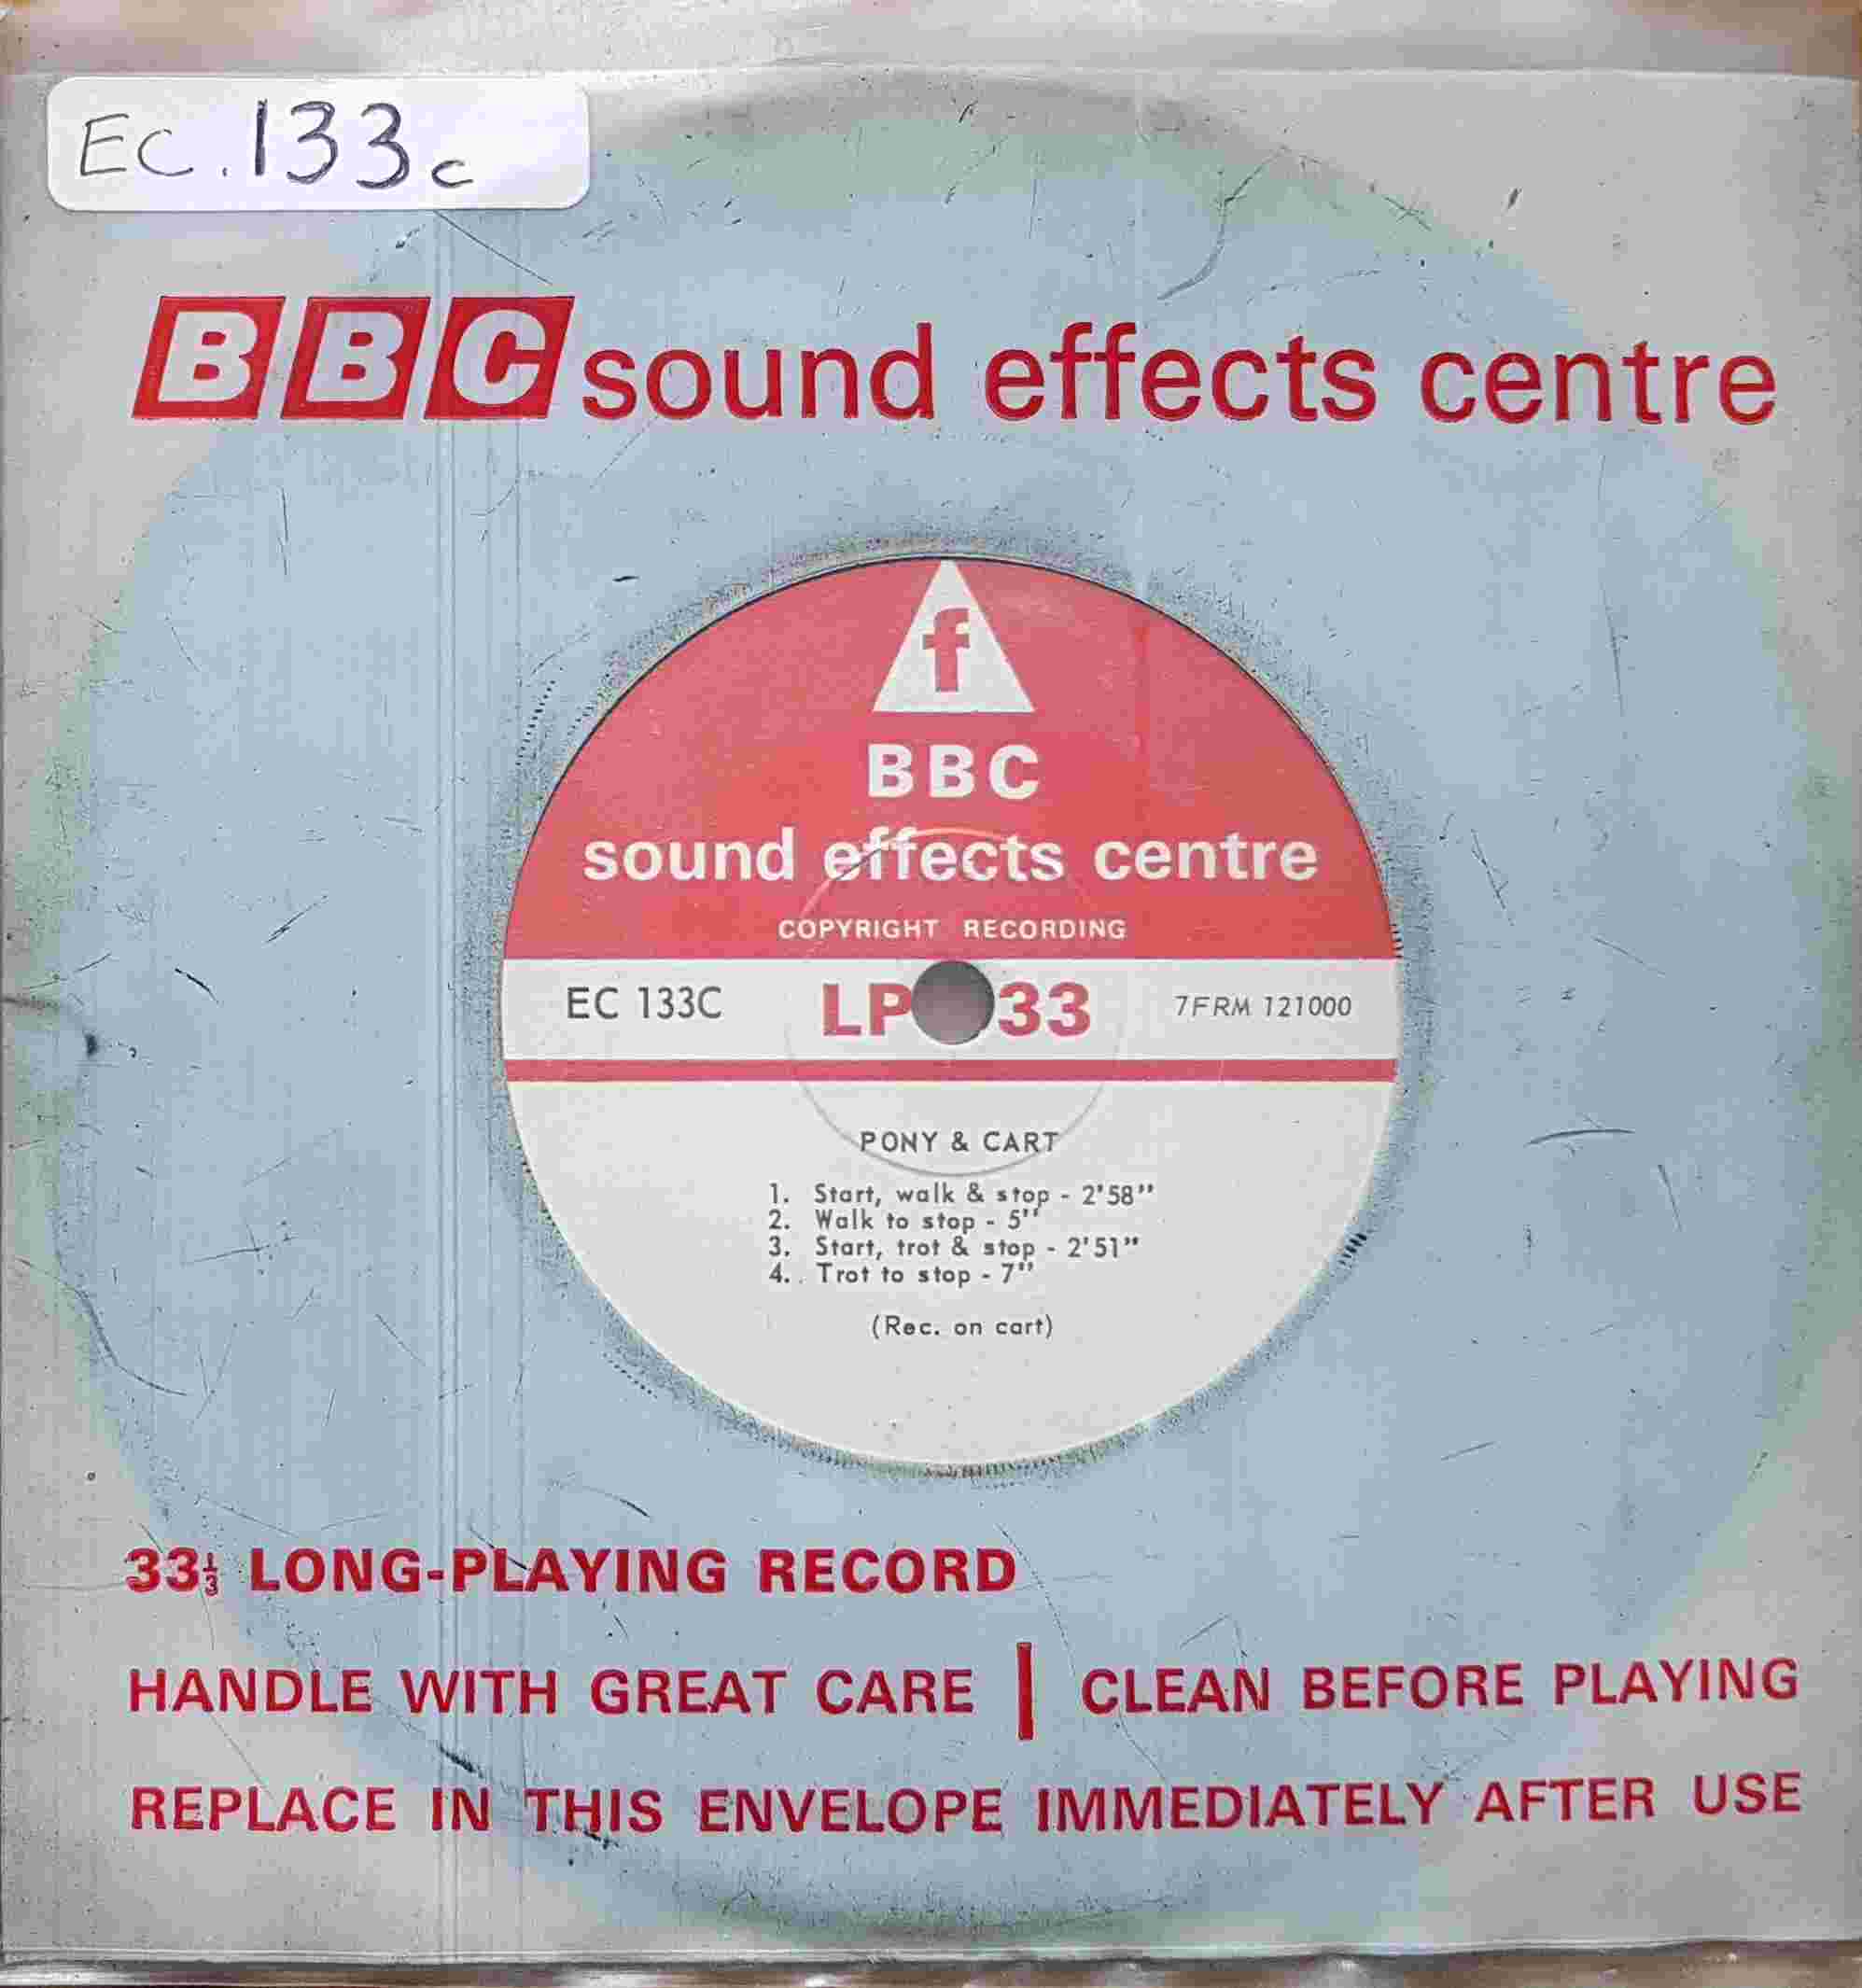 Picture of EC 133C Pony & cart (Recorded on cart) by artist Not registered from the BBC singles - Records and Tapes library